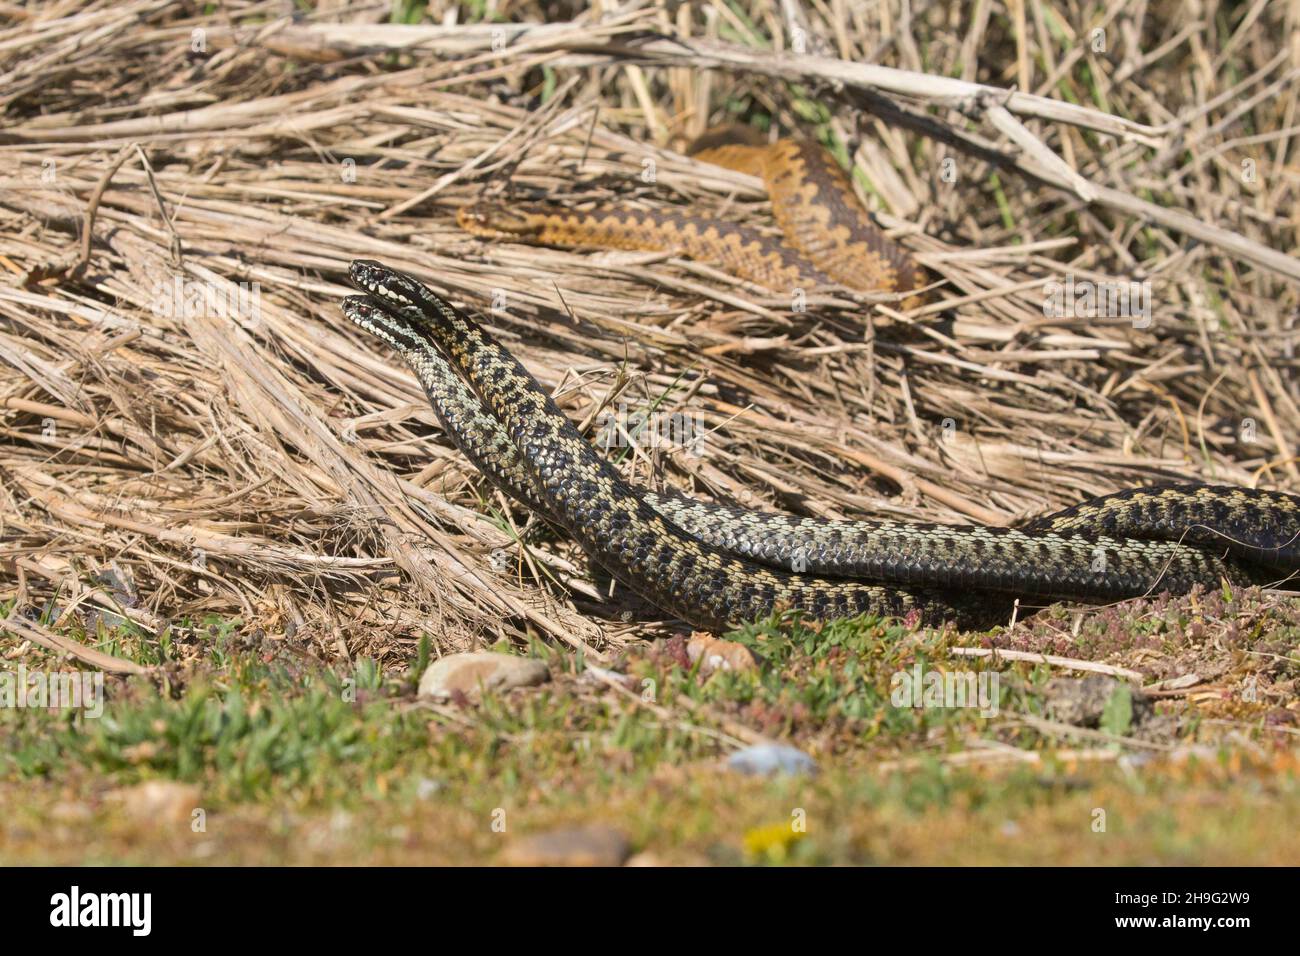 European Adder (Vipera berus) adult female basking and 2 adult males fighting, Suffolk, England, April Stock Photo